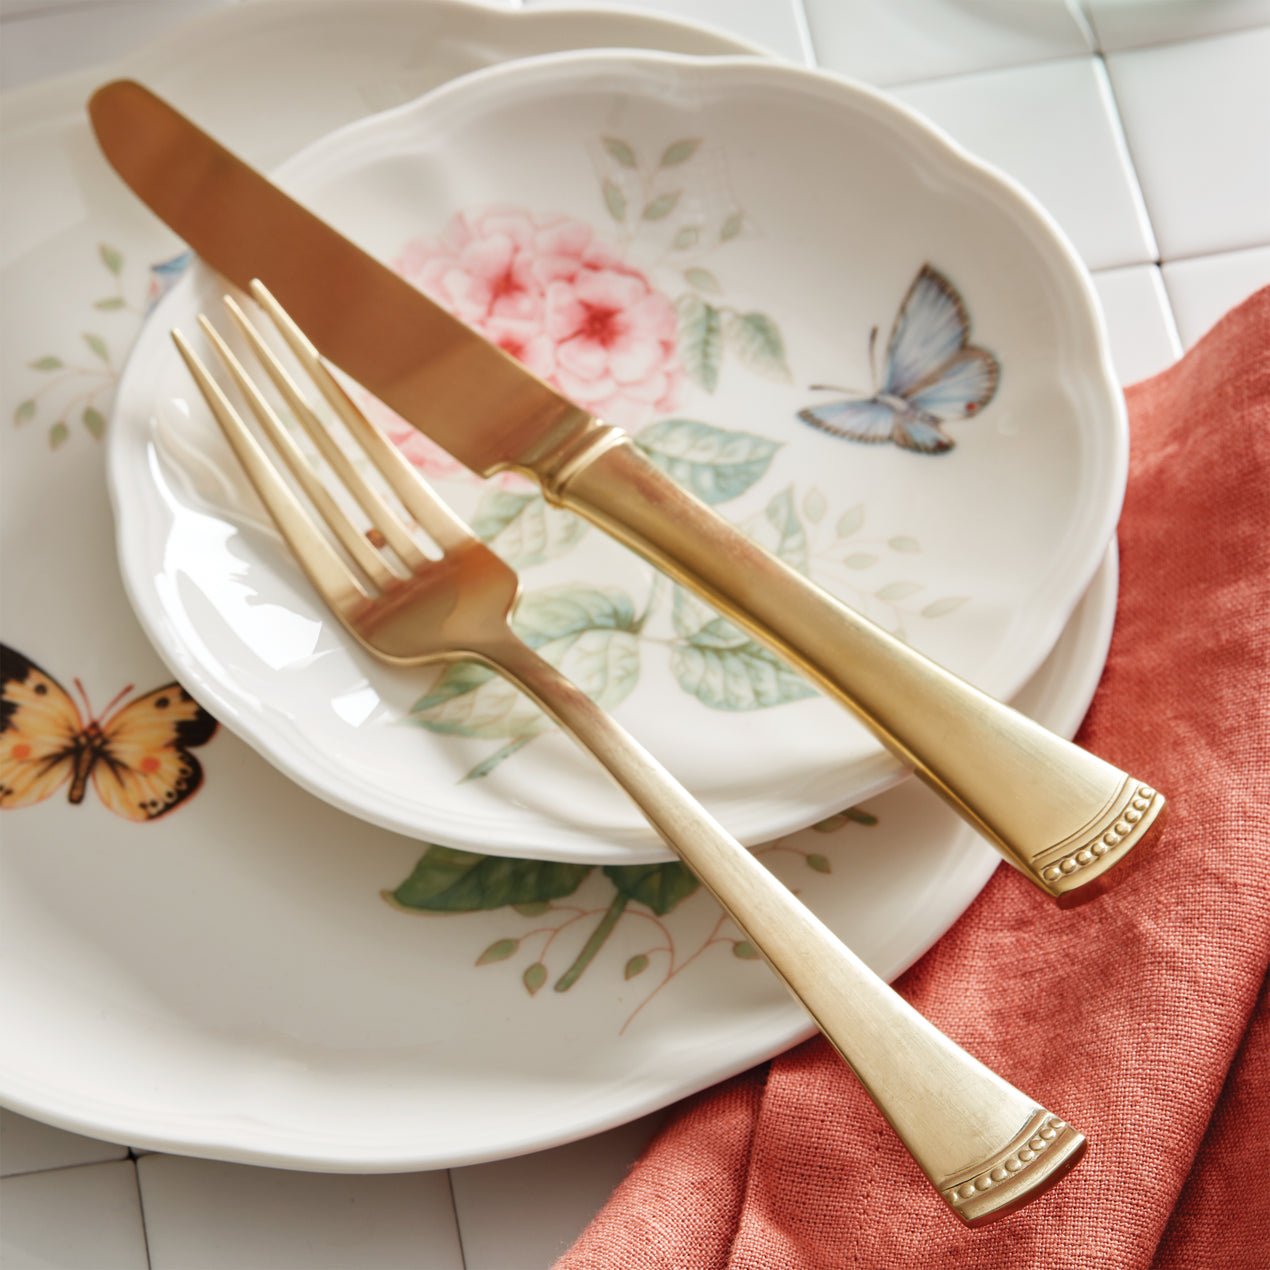 Set of 2 Galaxy Rose Gold Knife and Server Set